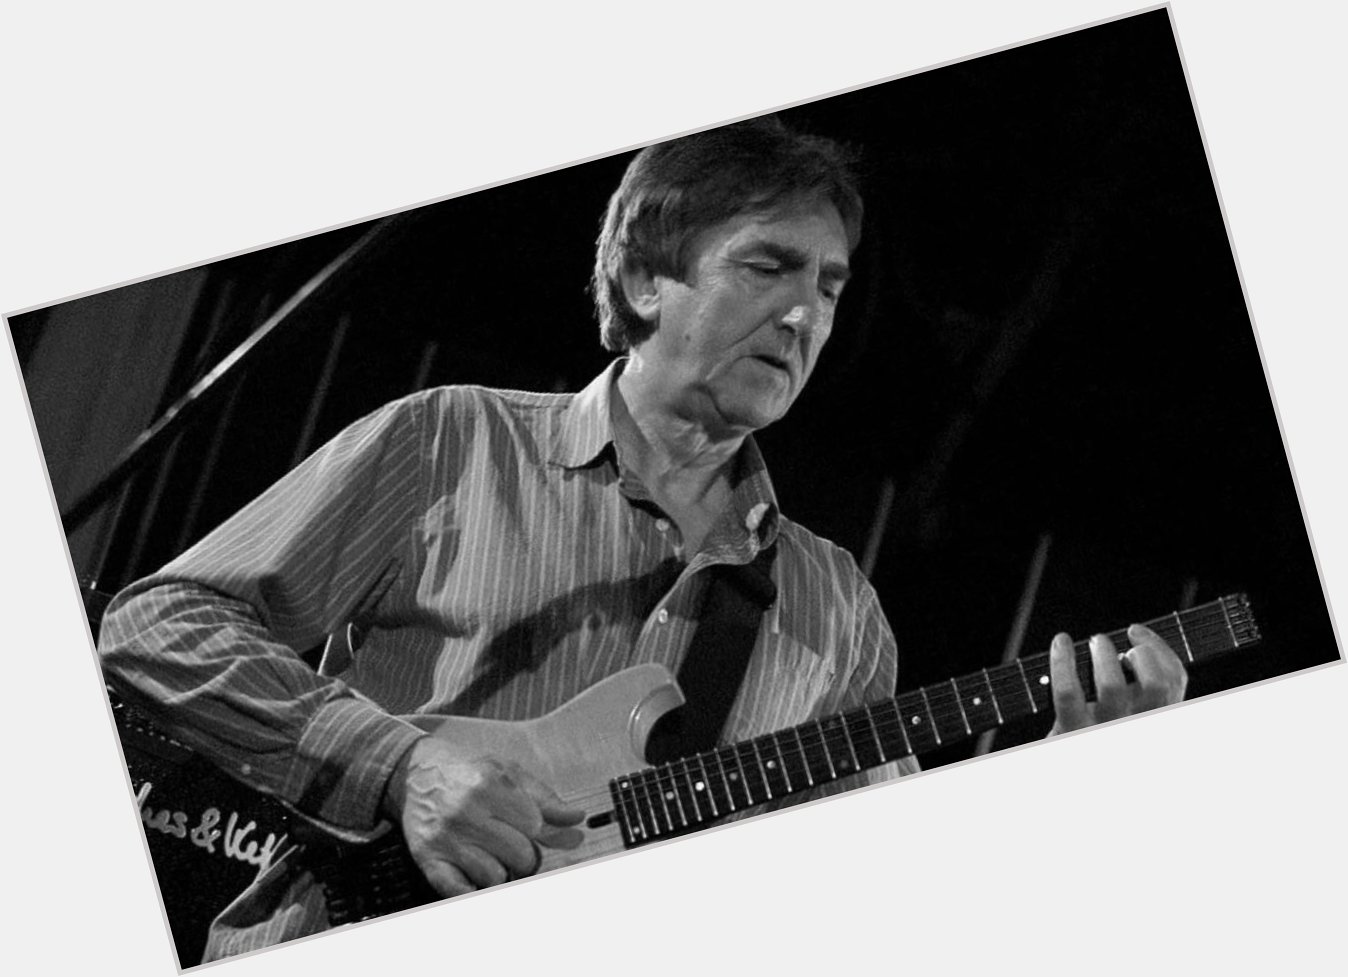 Happy birthday to the late Allan Holdsworth, who was born on this day in 1946 